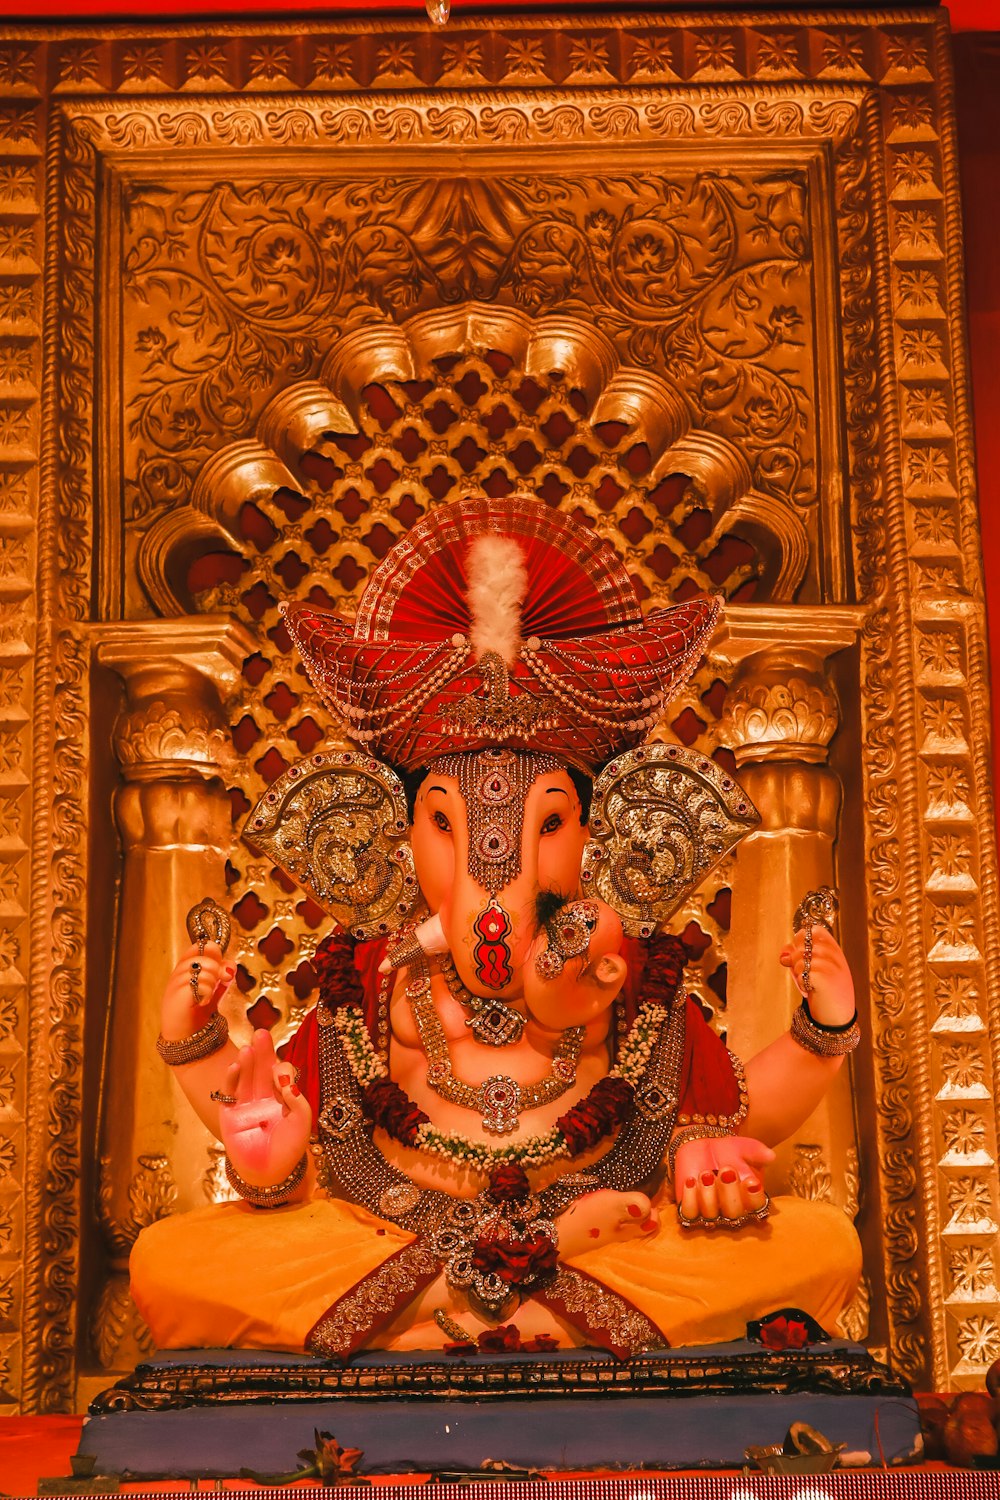 a statue of an elephant in a temple